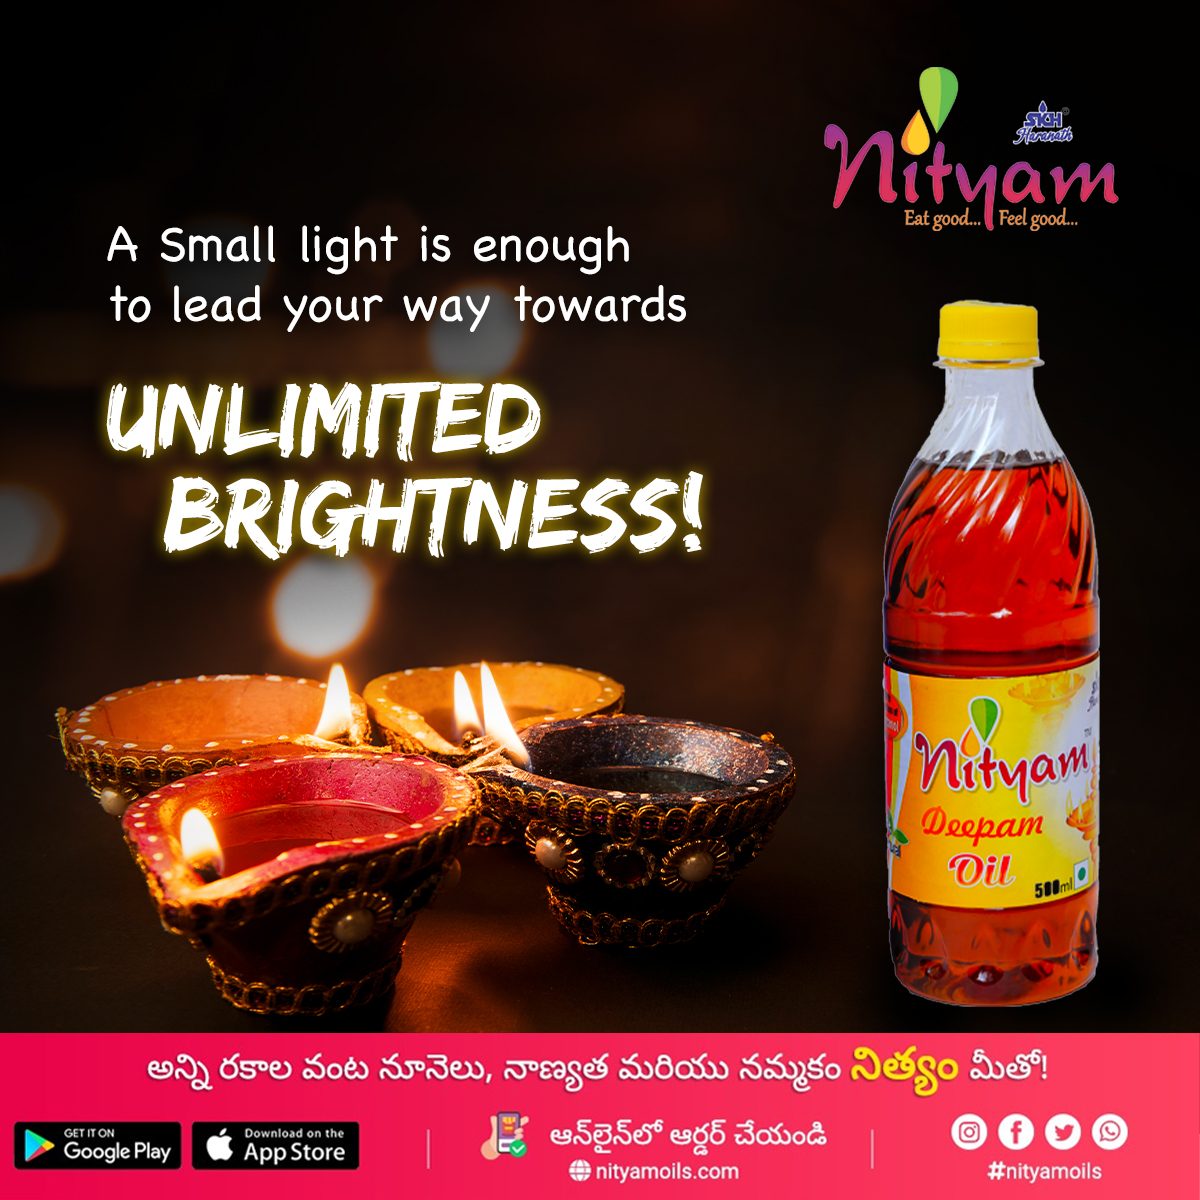 Illuminate your path to boundless radiance and inner devotion with the divine 𝐍𝐢𝐭𝐲𝐚𝐦 𝐃𝐞𝐞𝐩𝐚𝐦 𝐎𝐢𝐥! Let this sacred oil be your guiding light

🌐Buy Online: nityamoils.com 

#NityamOils #OrderNow #DoorDelivery #ShopOnline #PoojaOil #LampOil  #DeepamOil🪔